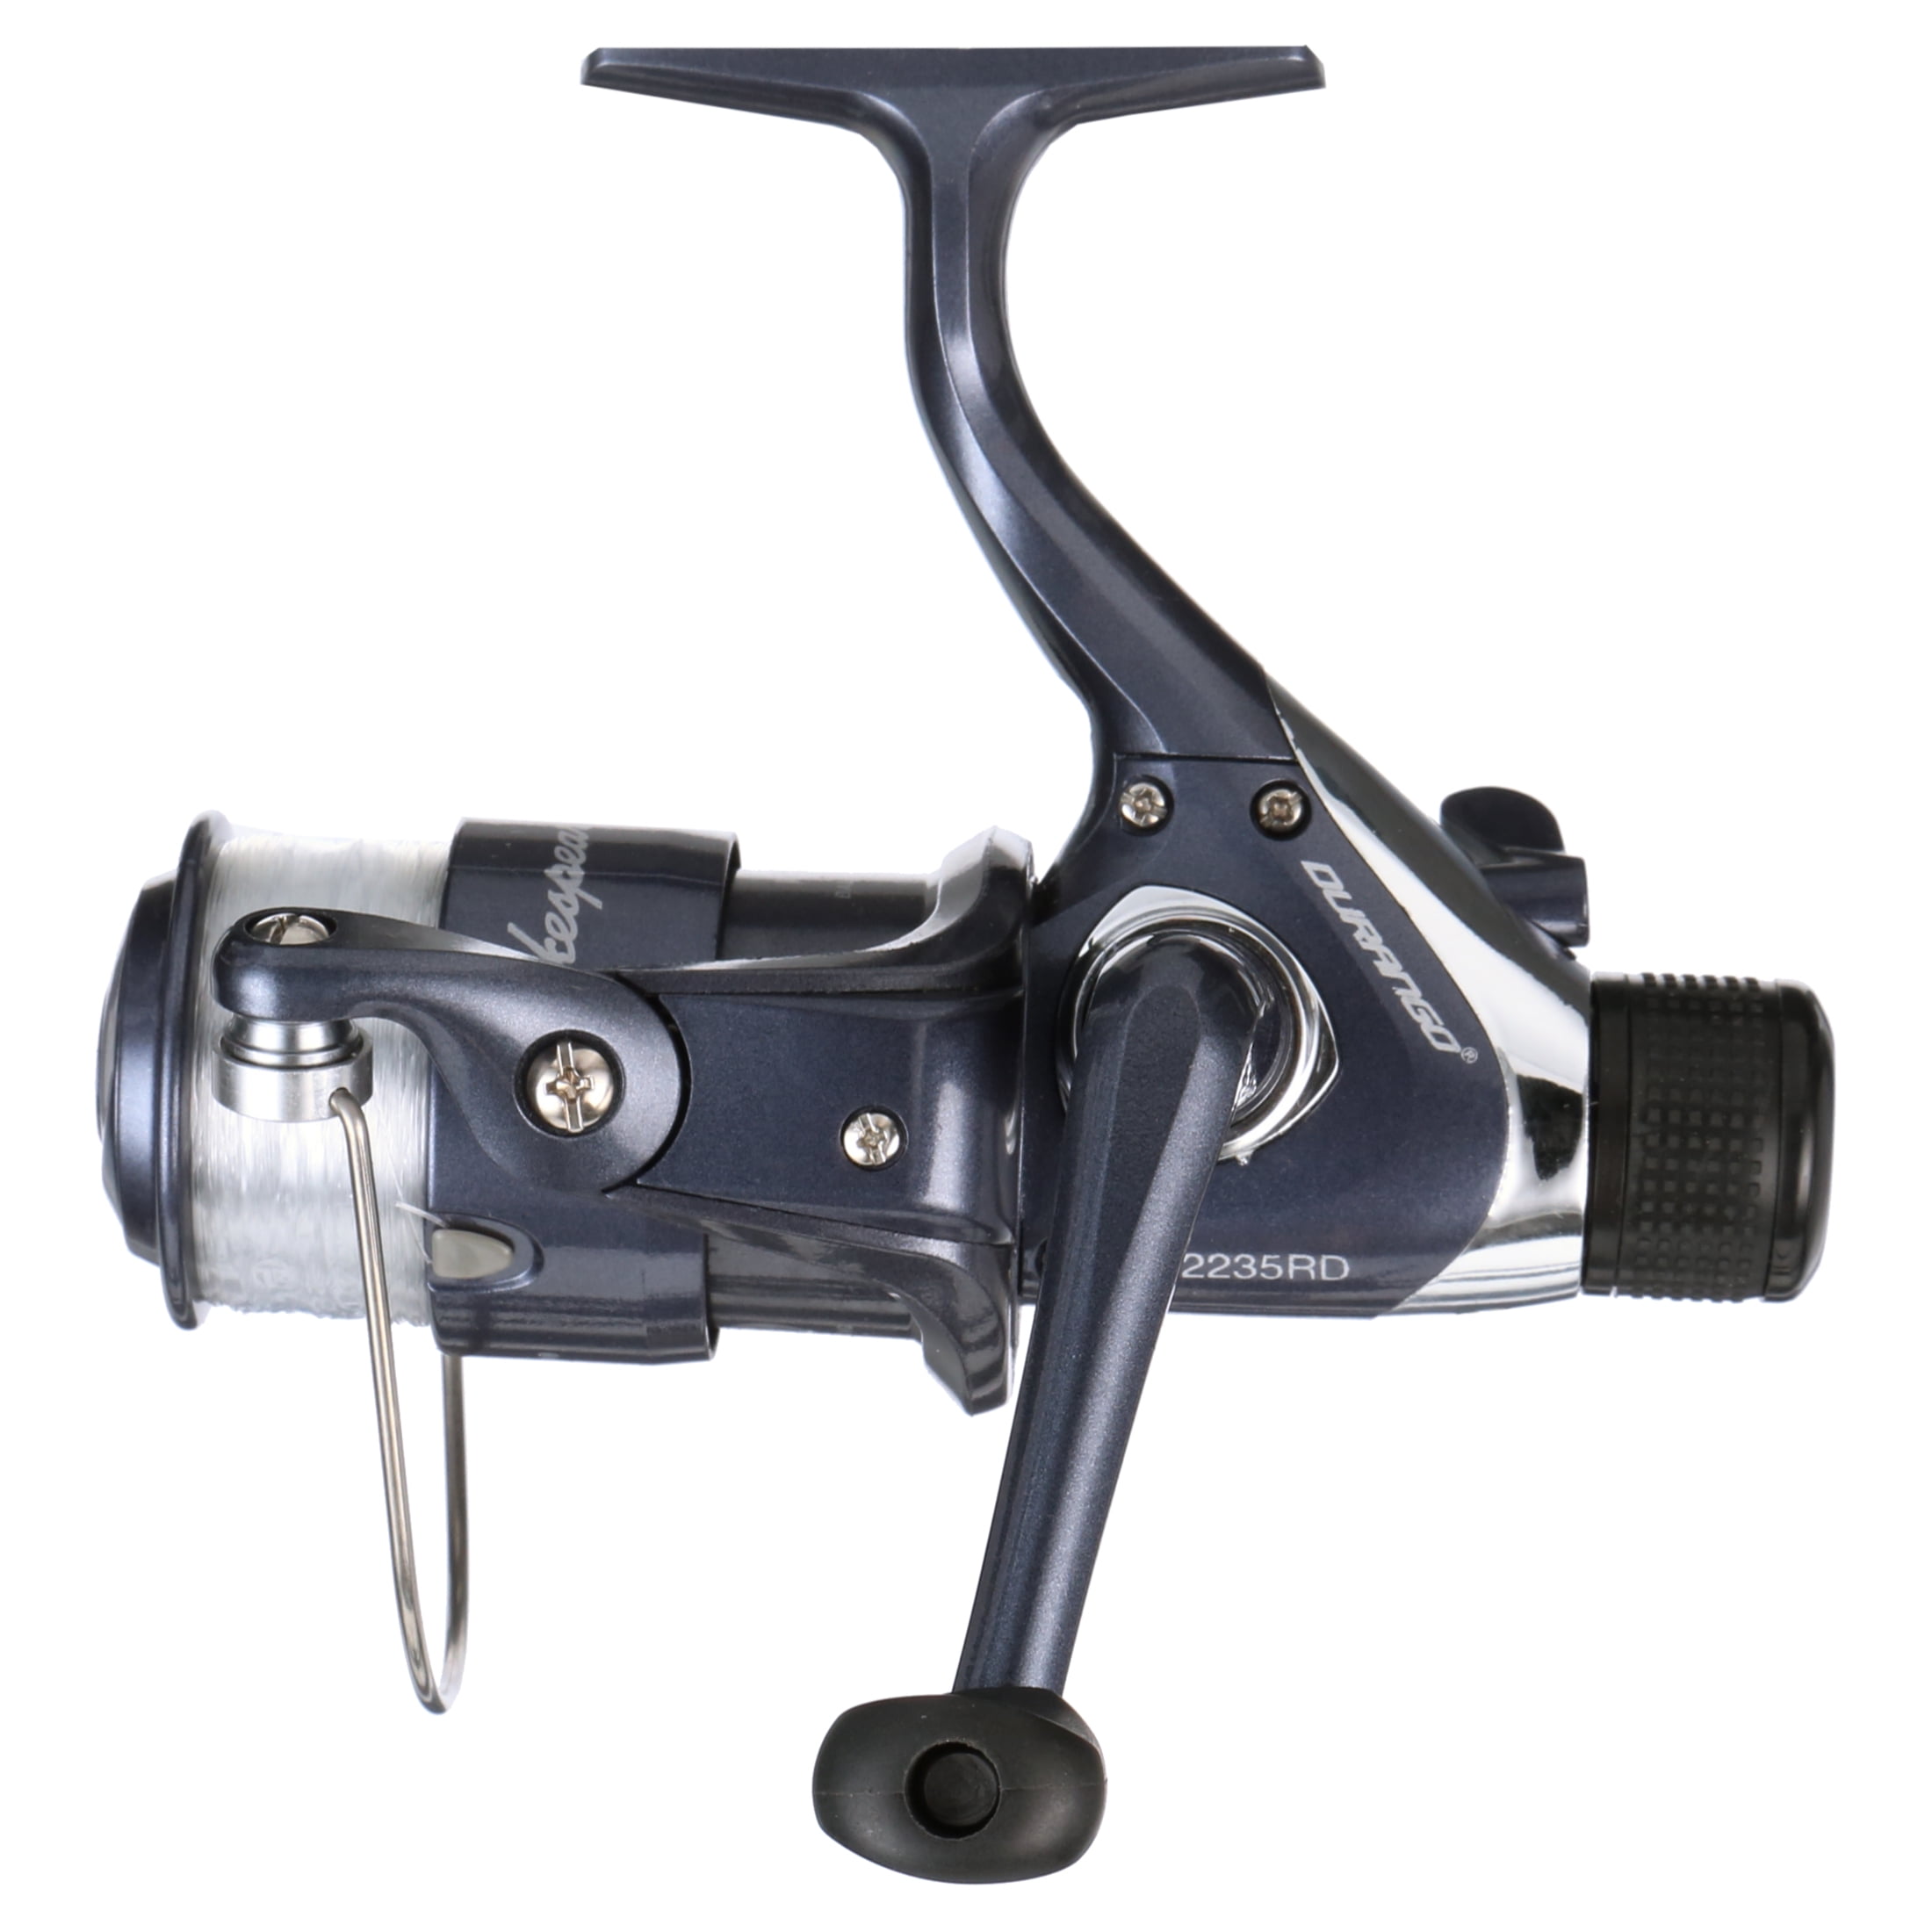 NEW SHAKESPEARE DURANGO Spinning Reel Red 2235RD 5:2:1 Gear Ratio $9.99 -  PicClick